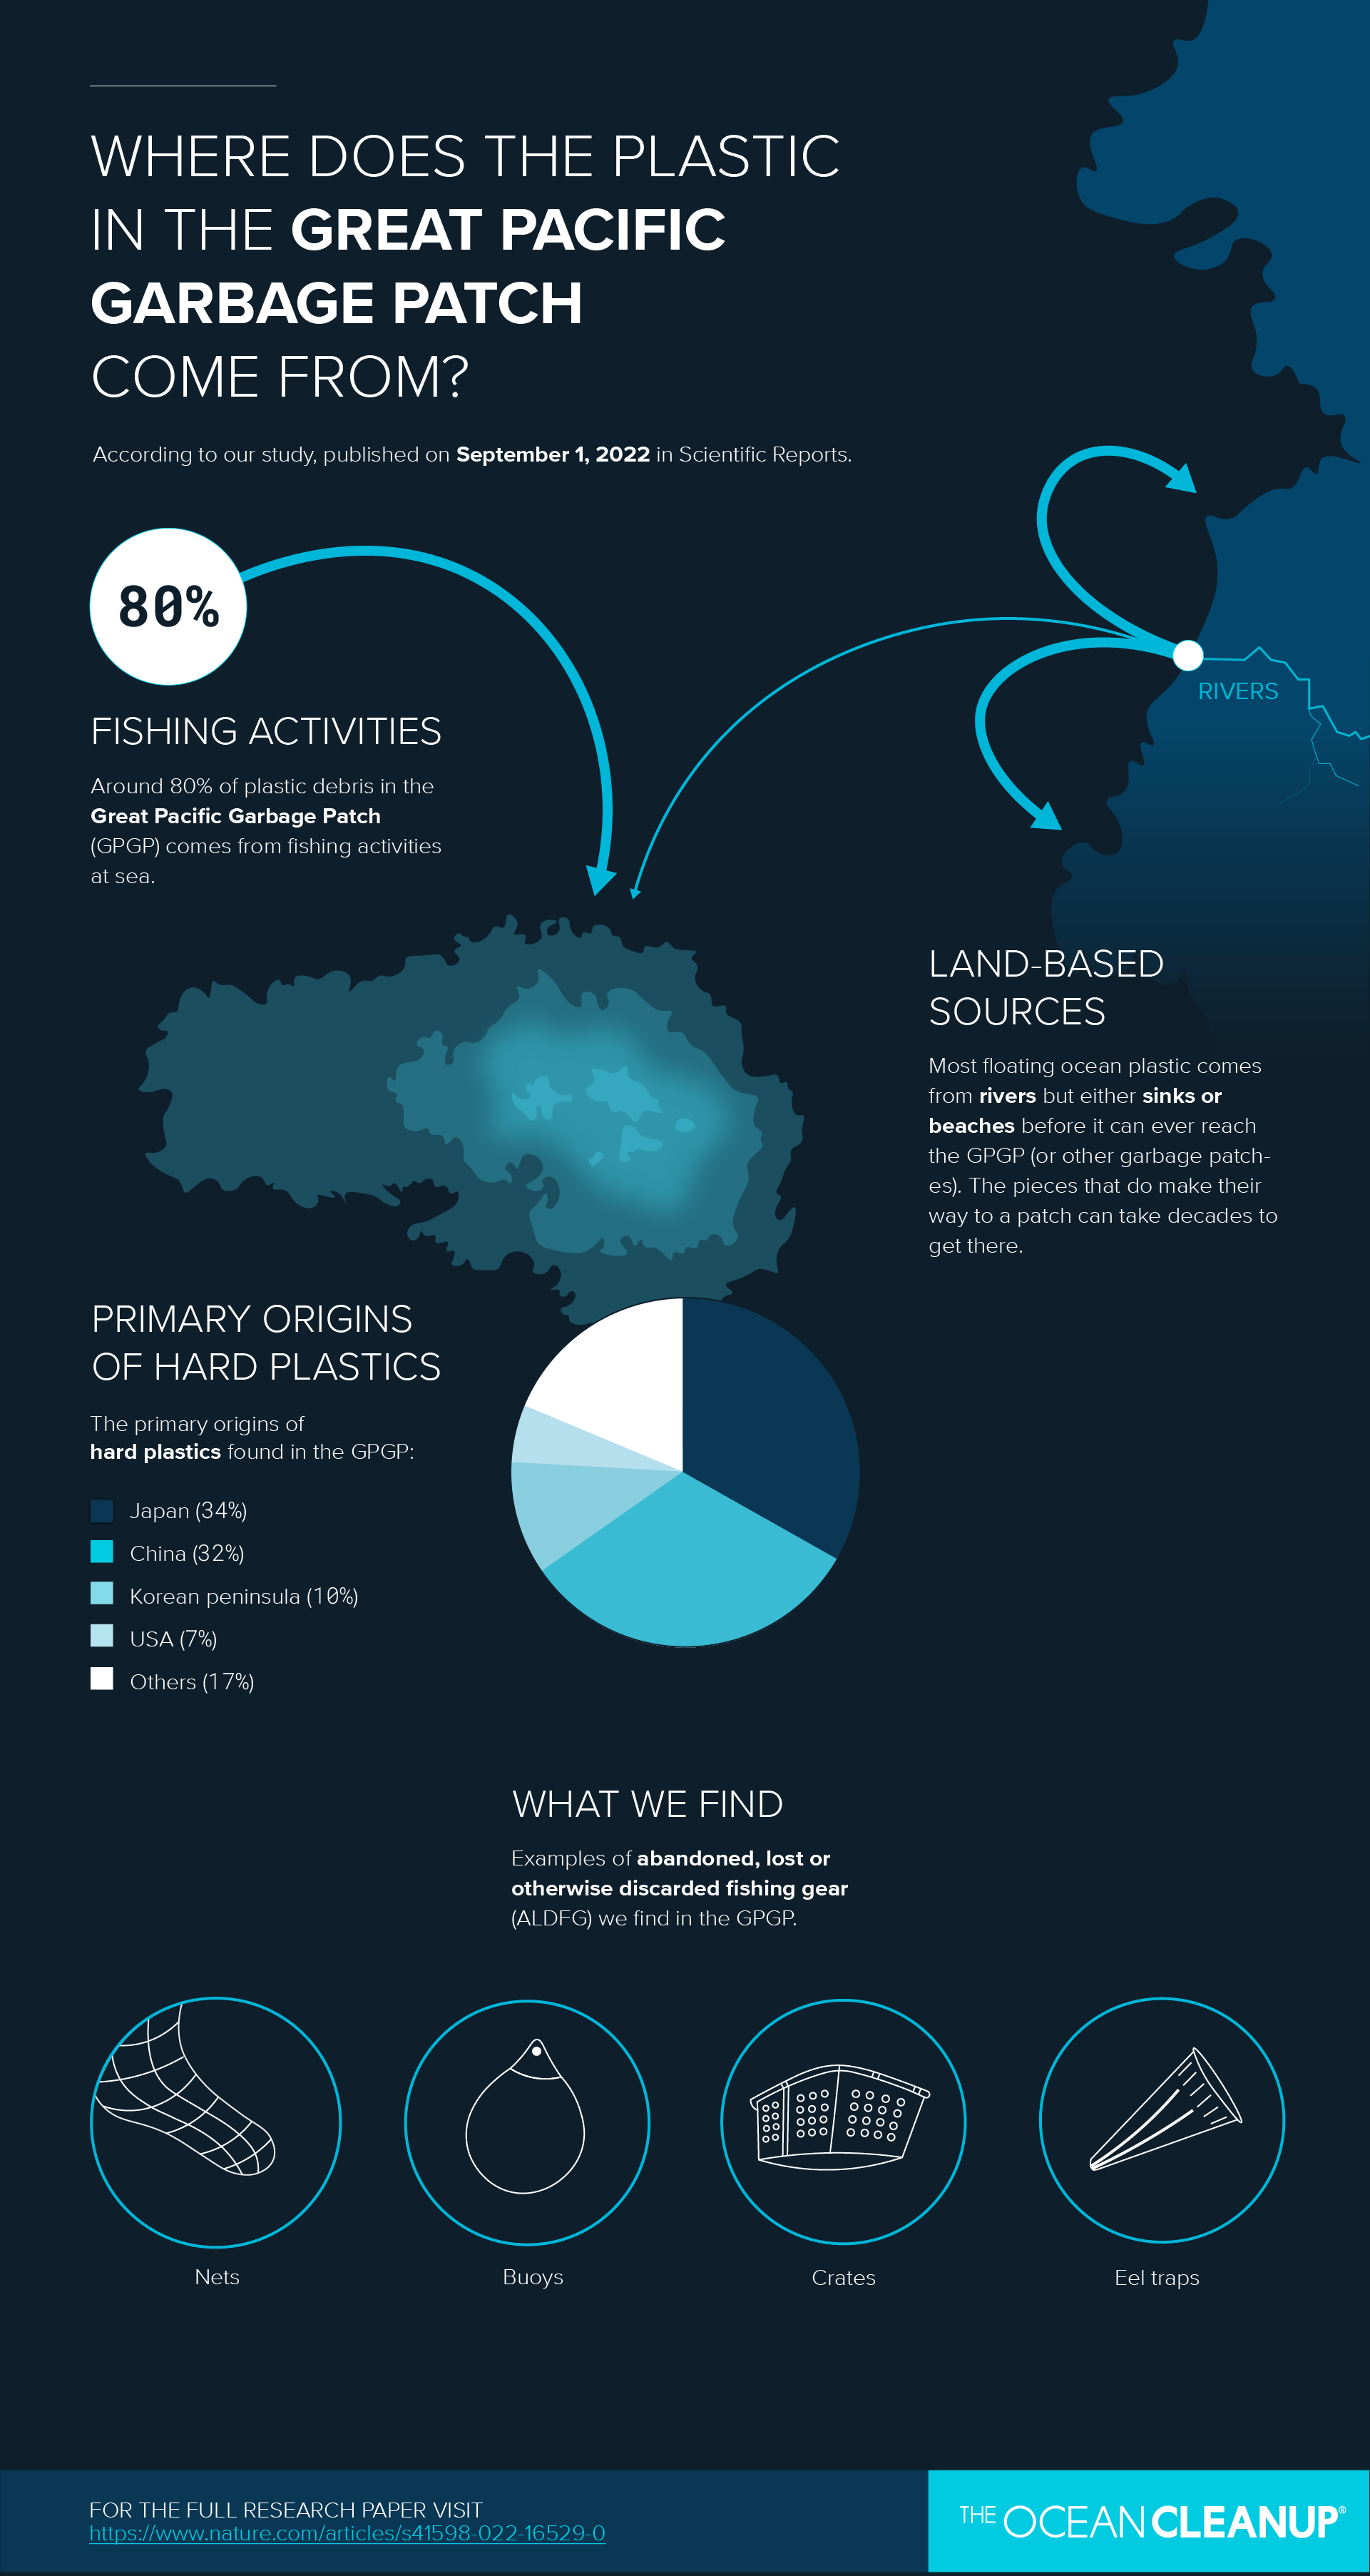 010822-The-Ocean-Cleanup-Scientic-Reports-Paper-Infrographic